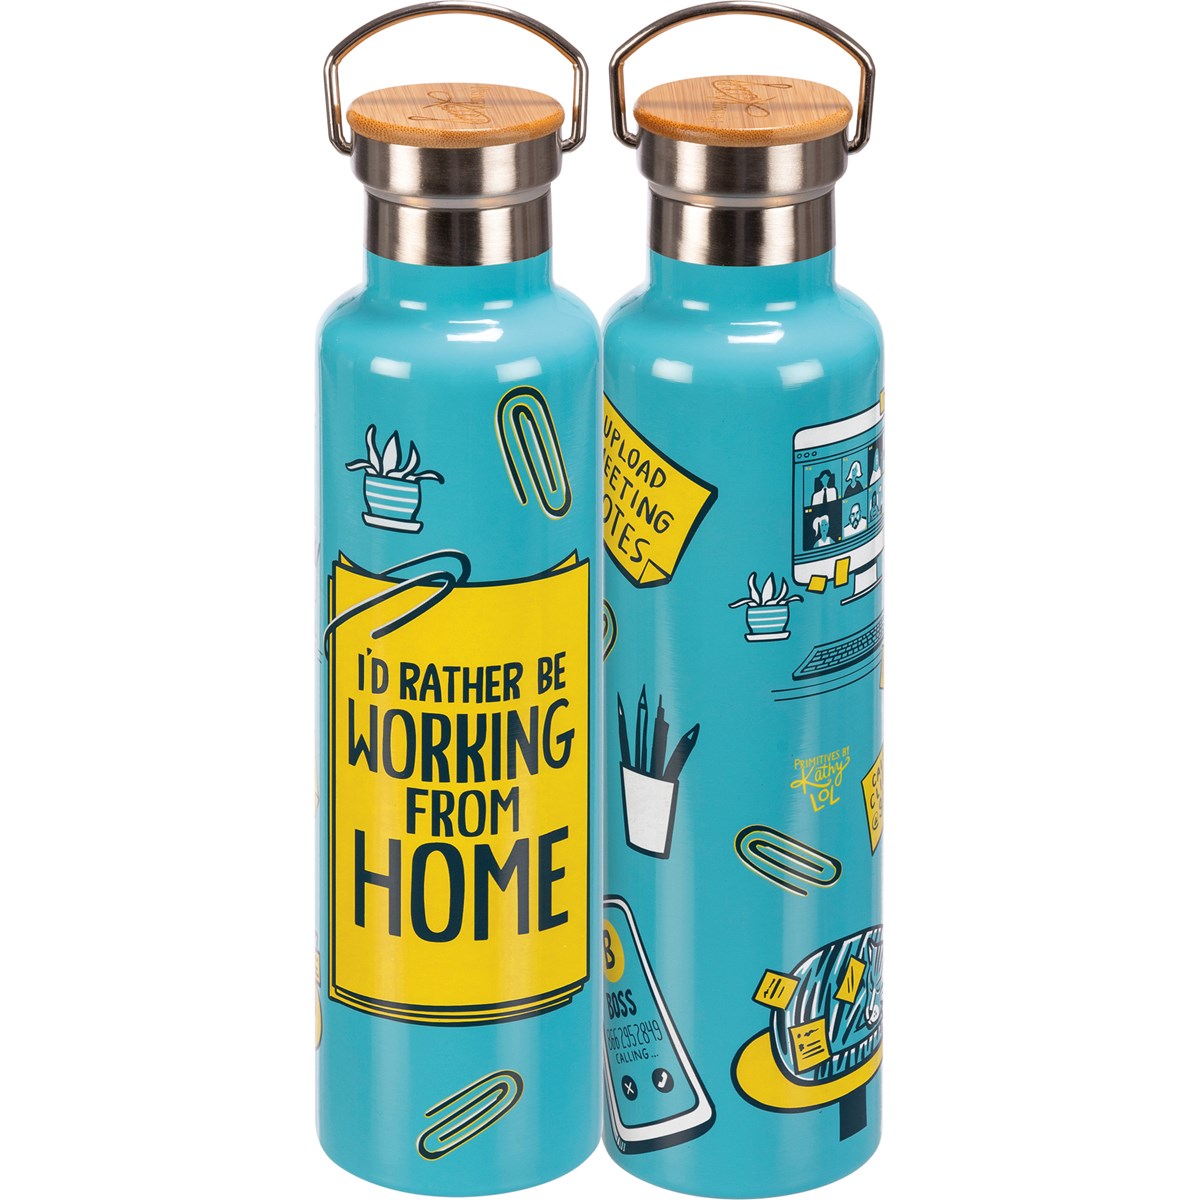 Insulated Bottle - Rather Be Working From Home - 25 oz., 2.75" Diameter x 11.25" - Stainless Steel, Bamboo